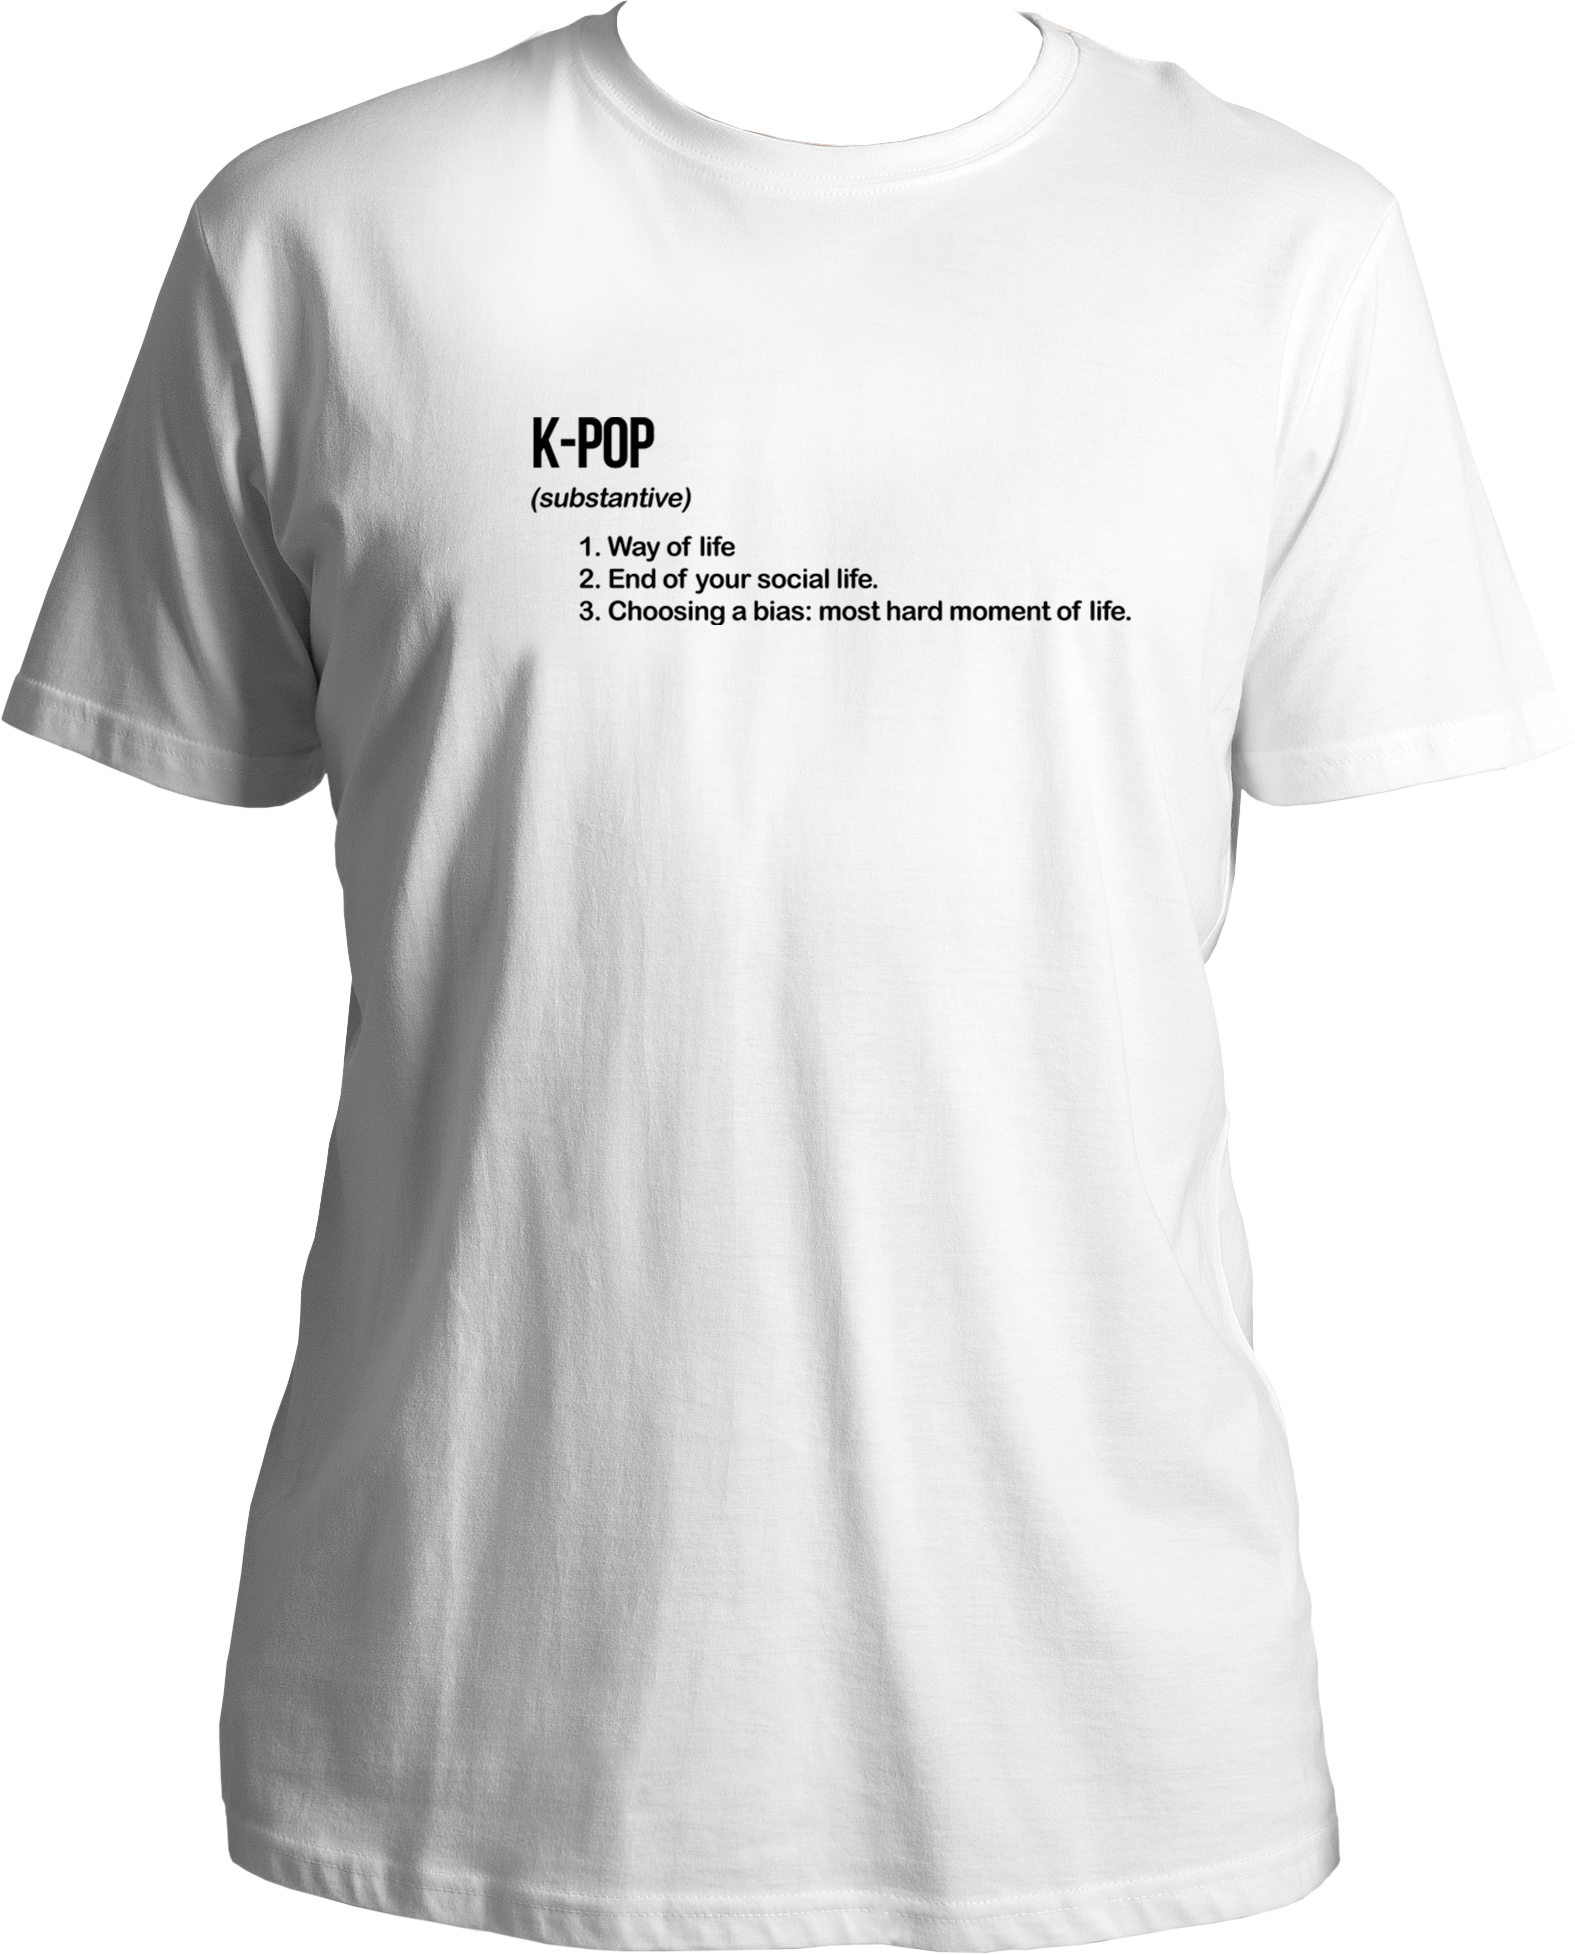 "Rock out in style with our Garrari K-Pop unisex T-shirts! Made from pure cotton, these tees are perfect for showing off your love for Korean pop music. Plus, at the best price, you can't go wrong! Get your hands on these fabulous shirts and proudly declare "I love K-Pop" to the world! #kpoptshirt